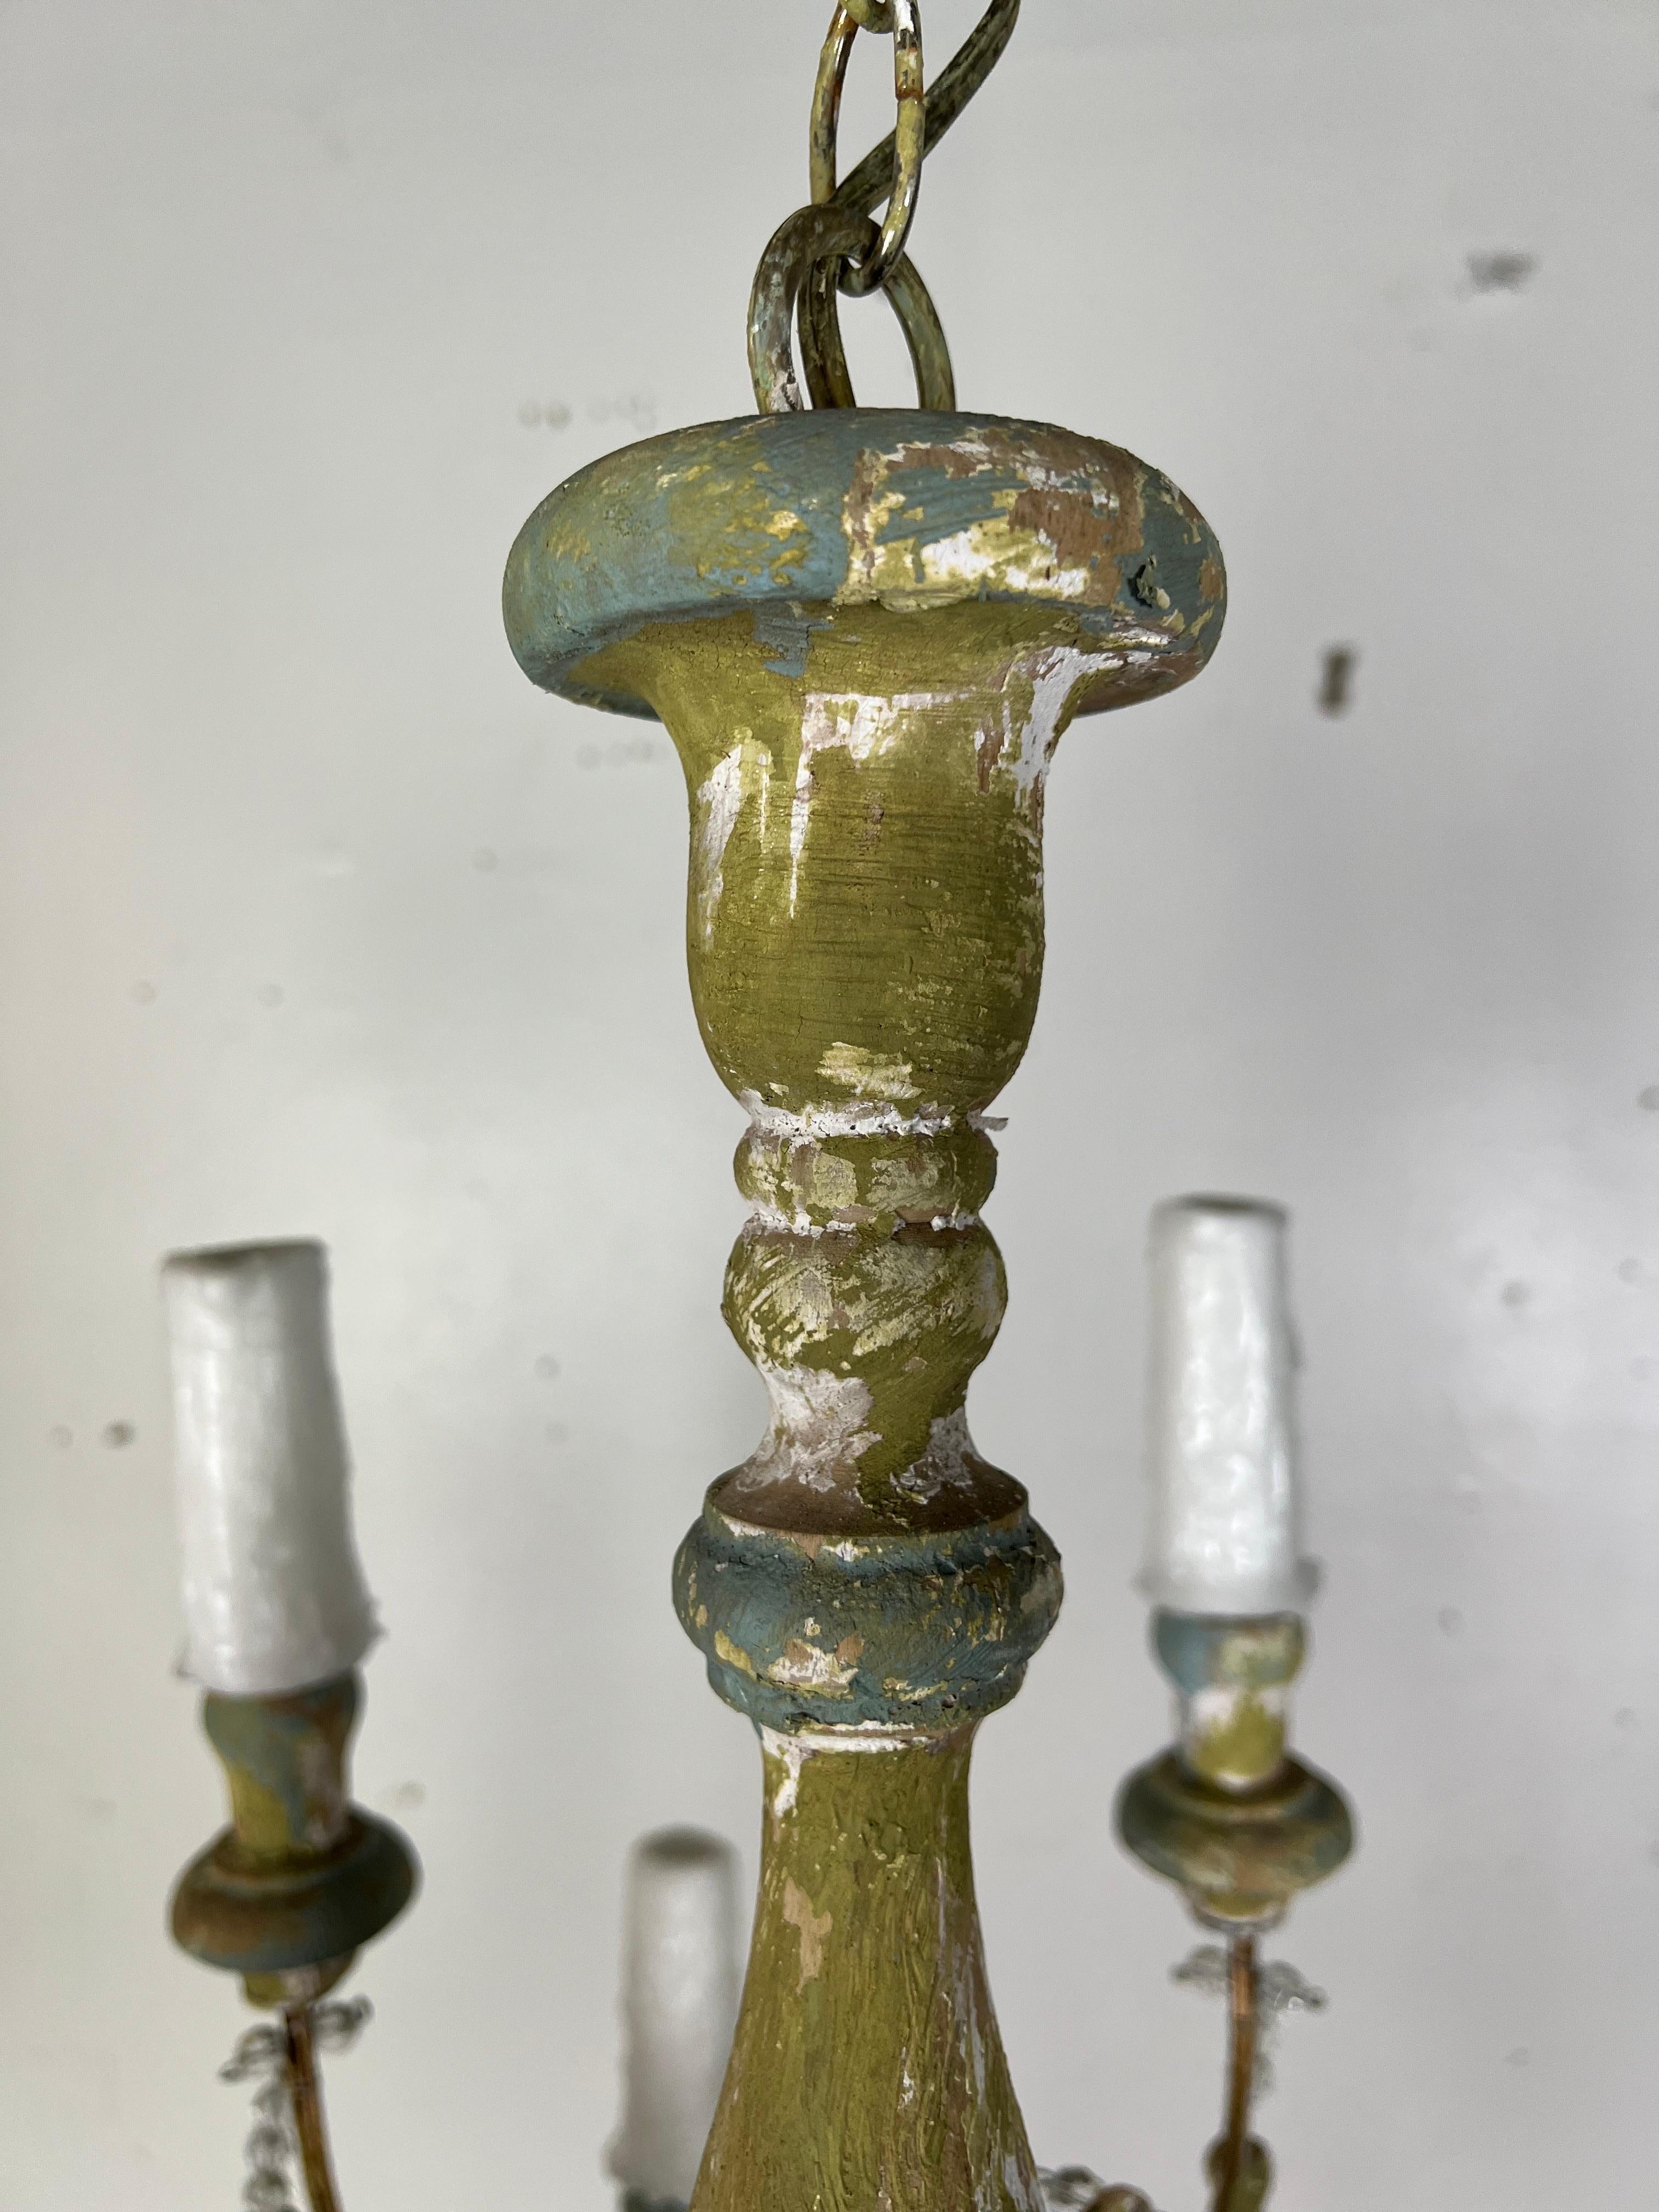 12-Arm Painted Wood Beaded Chandelier with Tassels In Distressed Condition For Sale In Los Angeles, CA